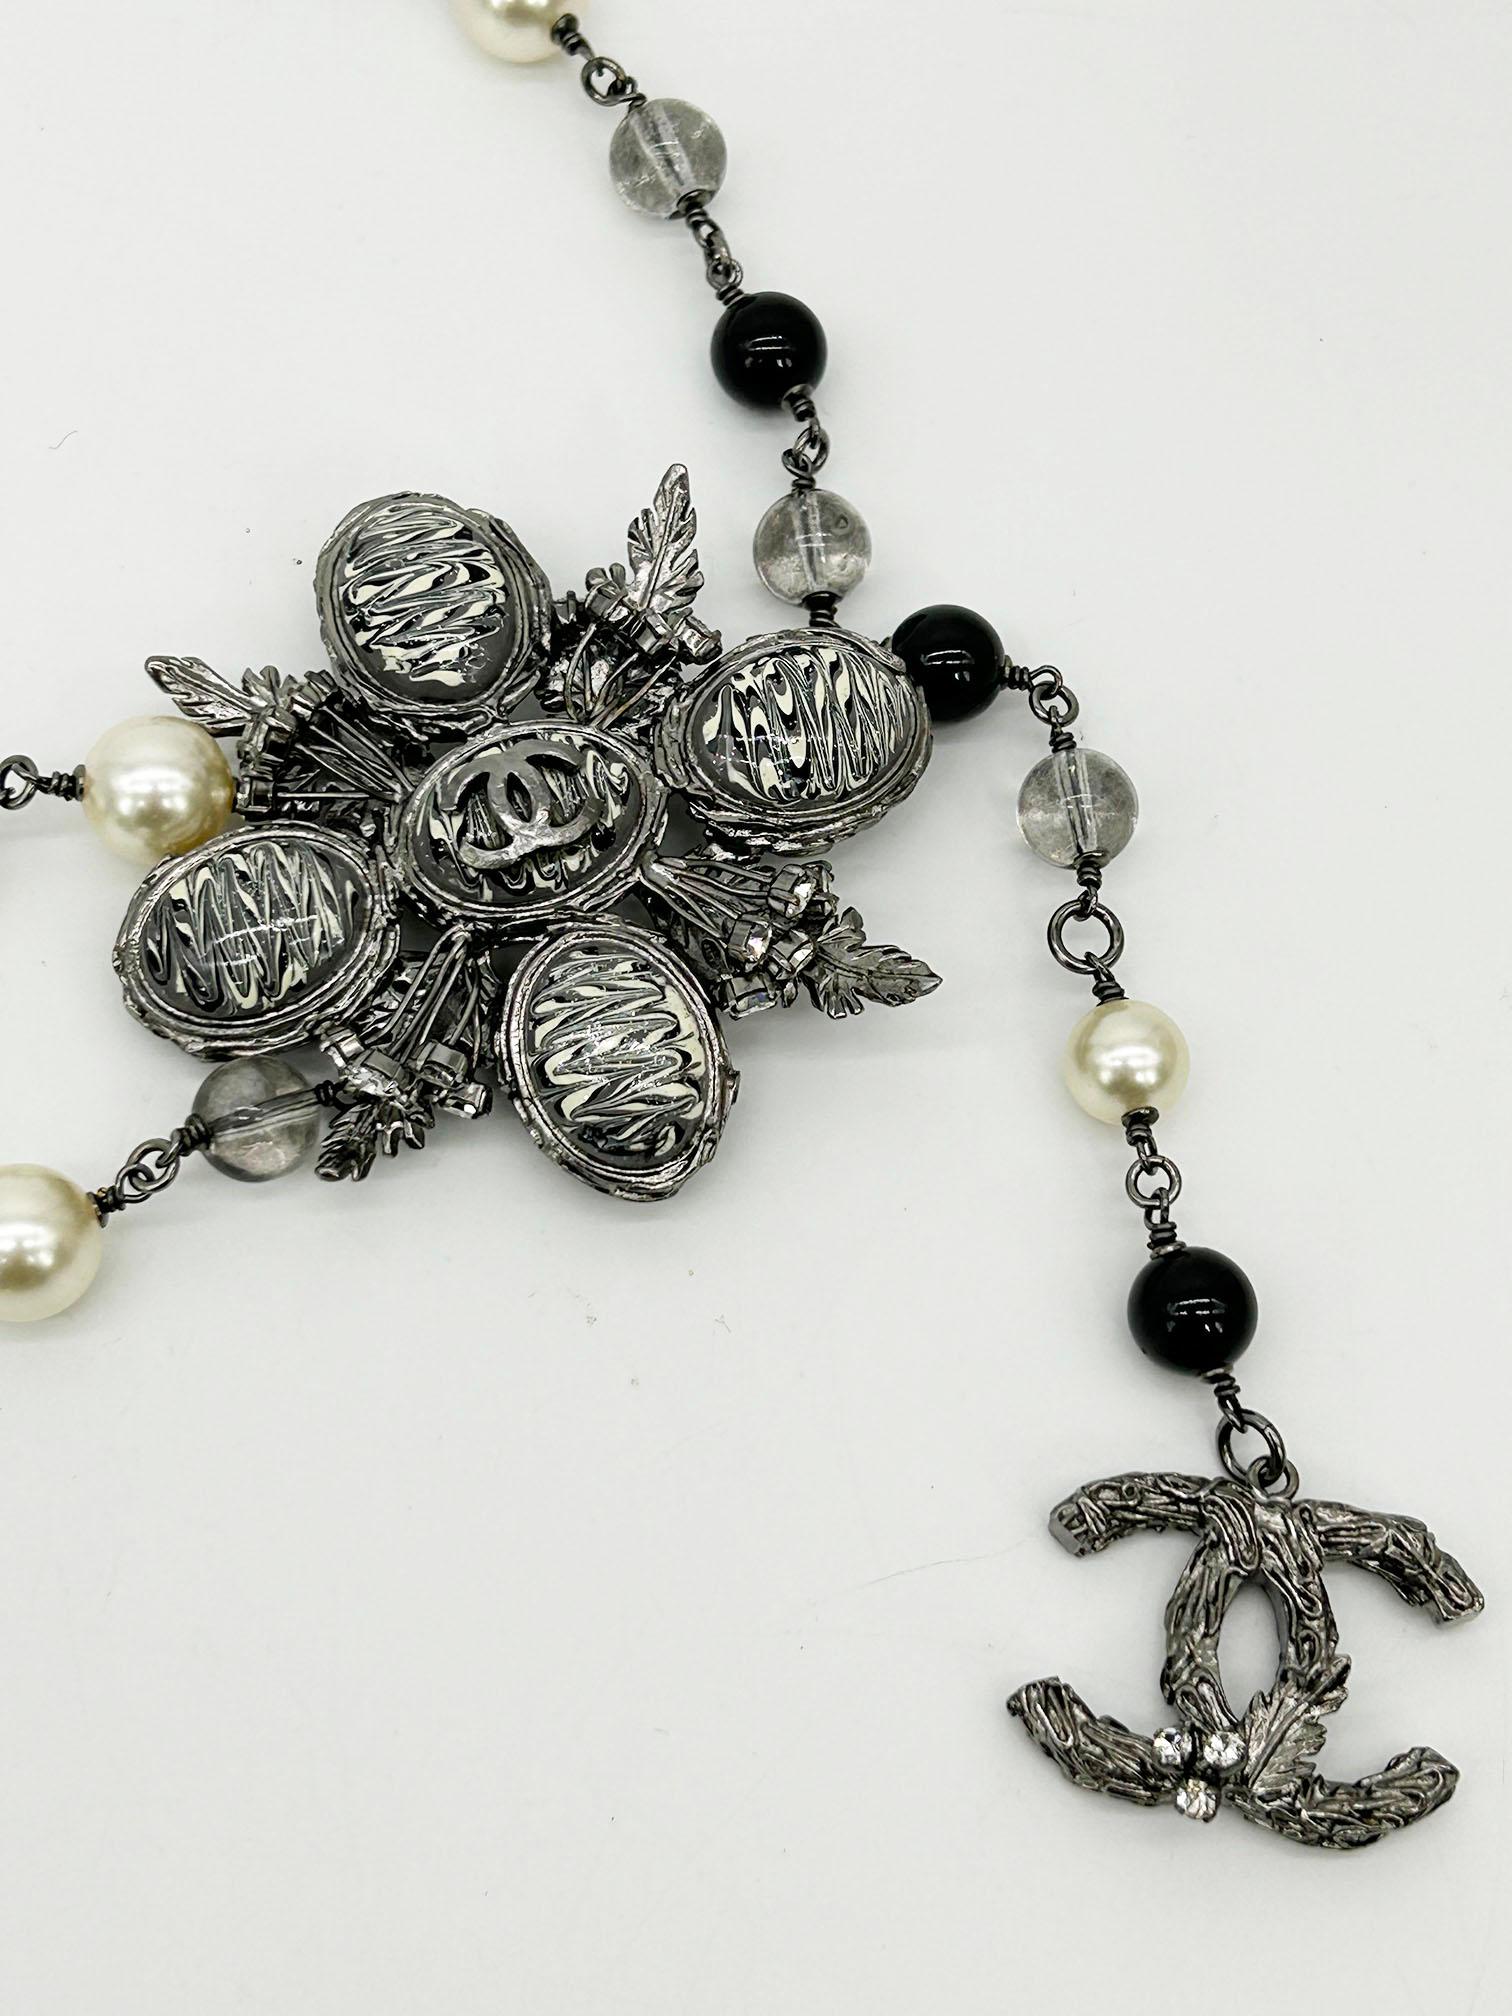 Chanel Beaded Marble Flower Belt Necklace In Excellent Condition For Sale In Philadelphia, PA